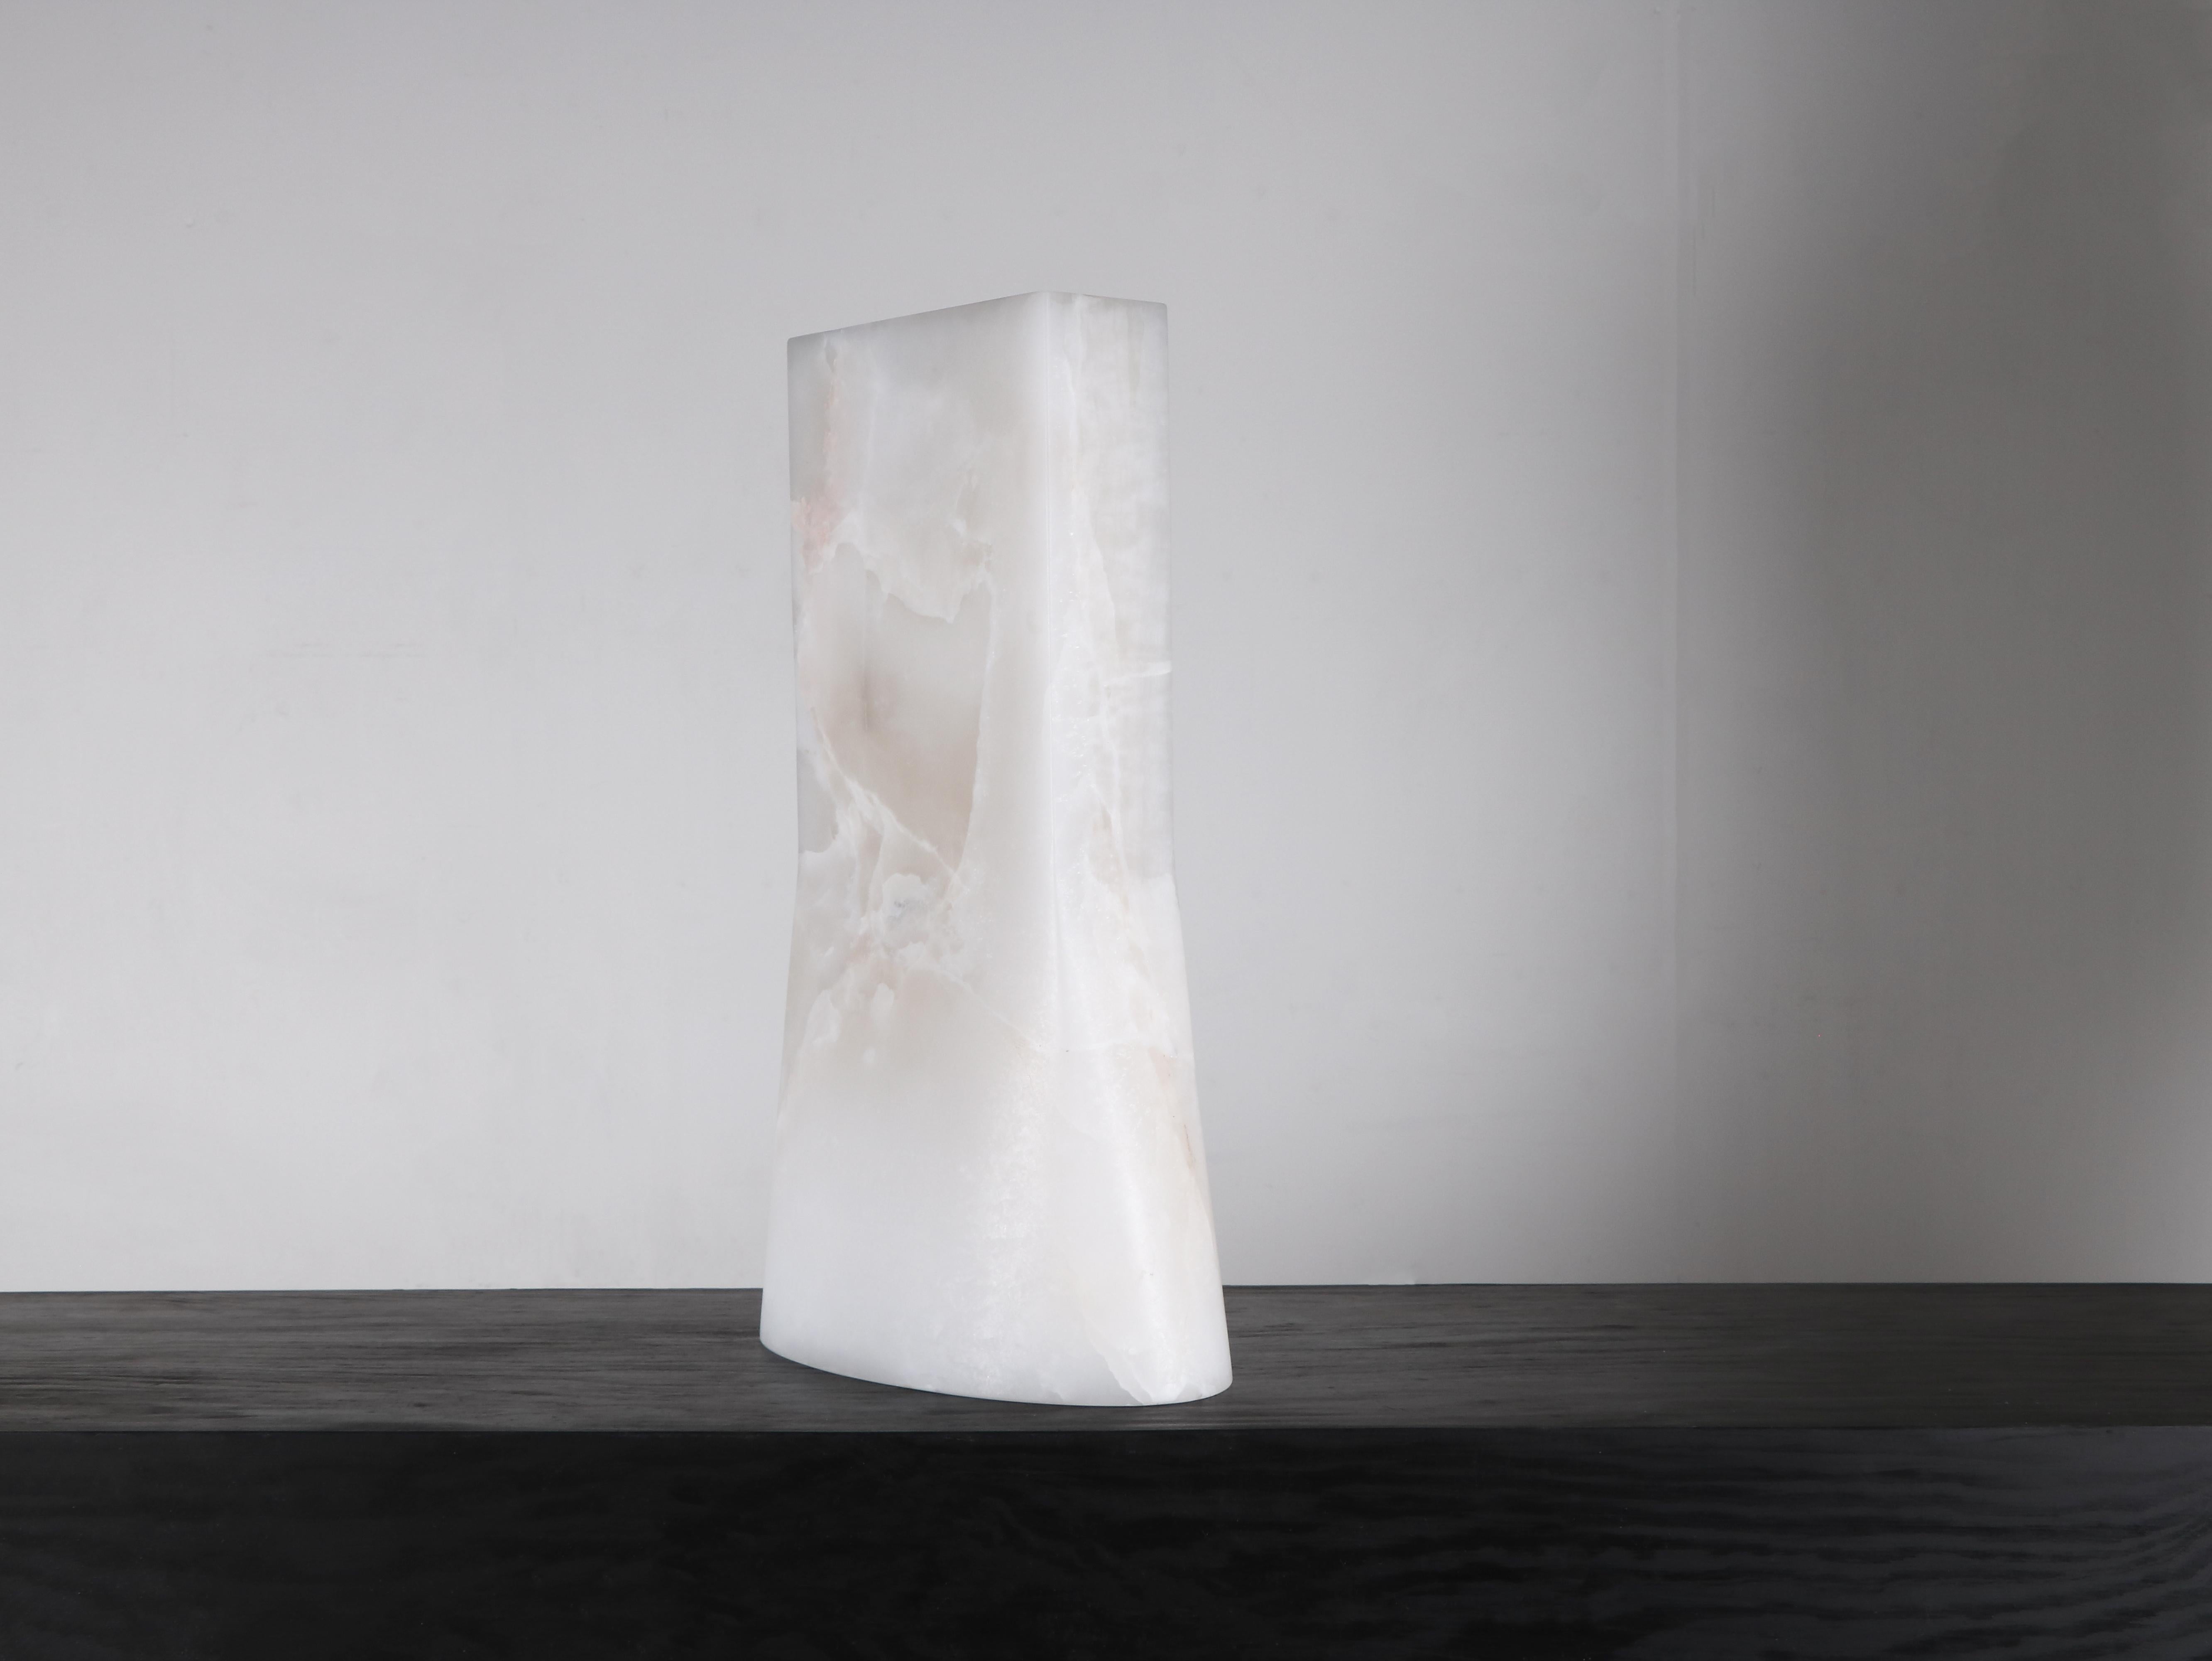 Oval Vase by Lucas Tyra Morten
Limited Edition of 10 + 2 AP
Signed
Dimensions: D 16 x W 30 x H 50 cm.
Material: Onyx

Objects comes with a 